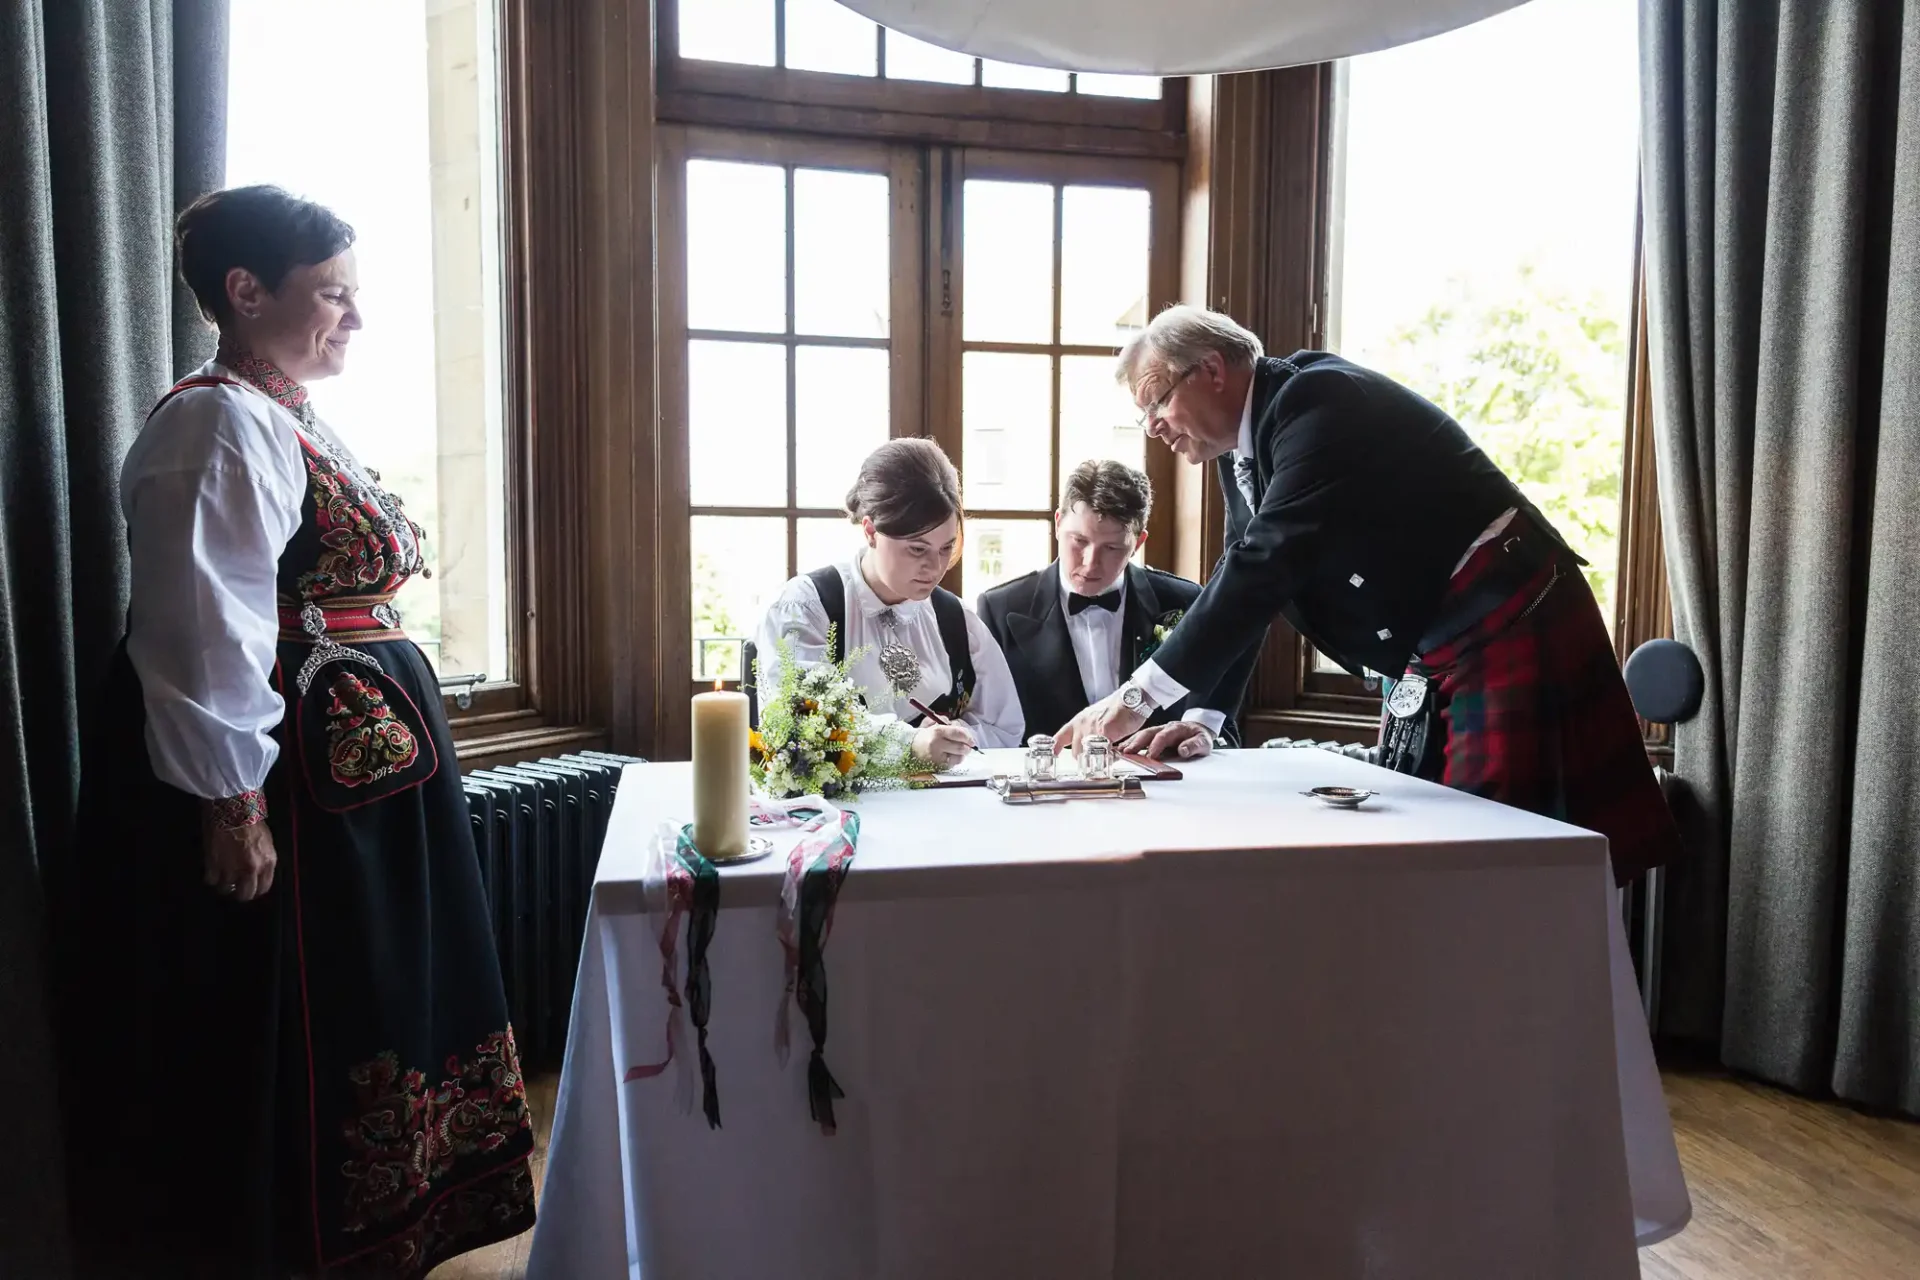 A wedding couple signs a register at a table, assisted by an official, inside a room with traditional décor and large windows, with two people in ethnic attire observing.